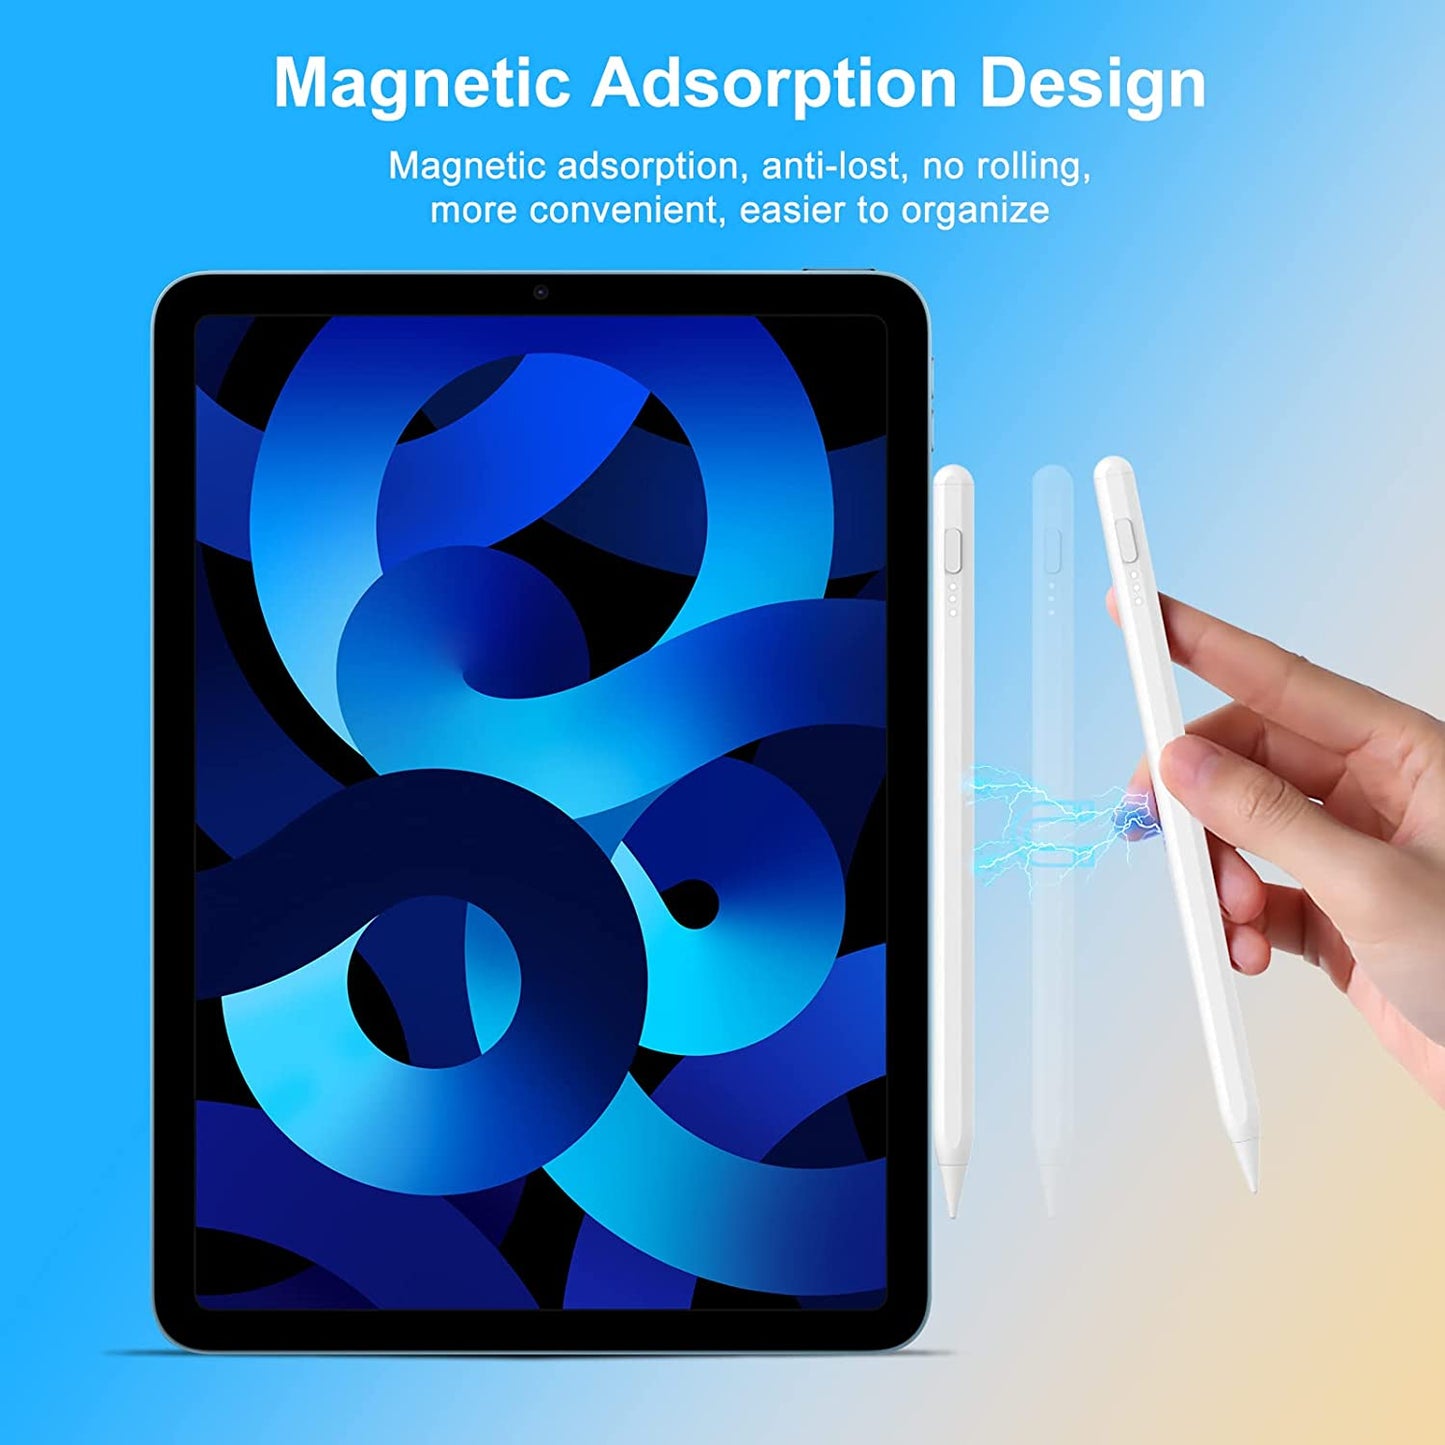 New Stylus Pen for iPad (2018-2023),10mins Charge, Palm Rejection, Tilting Detection, iPad Pencil 2nd Generation Compatible with Apple iPad Pro 11/12.9 inch, iPad Mini 6/5, iPad Air 5/4/3, iPad 10/9/8/7/6